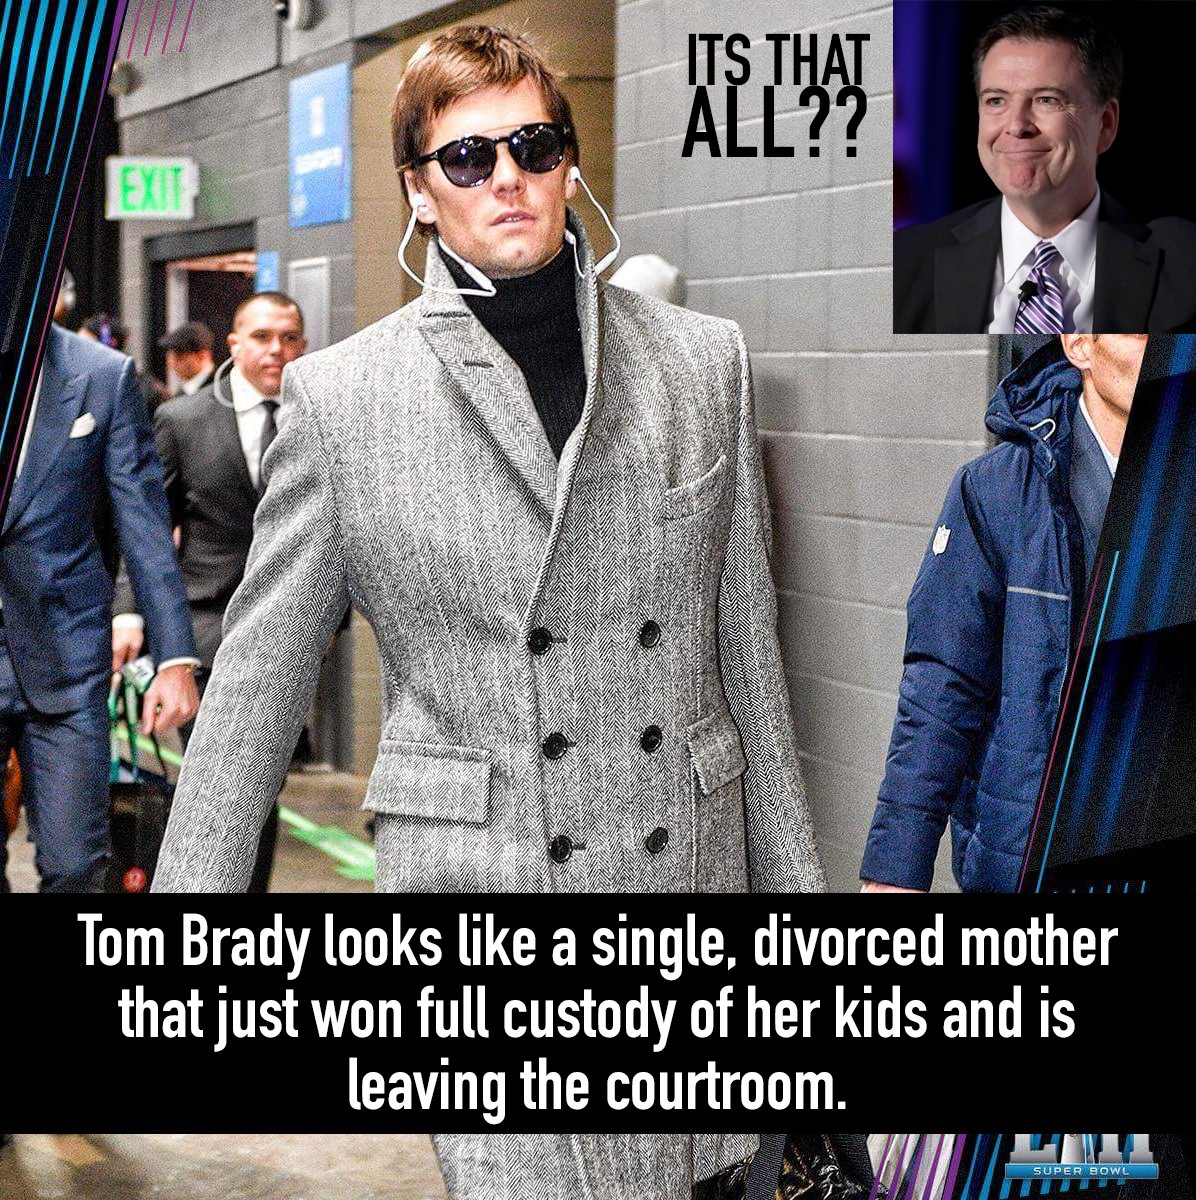 tom brady divorced mom - Its That All?? Exit Tom Brady looks a single, divorced mother that just won full custody of her kids and is leaving the courtroom.